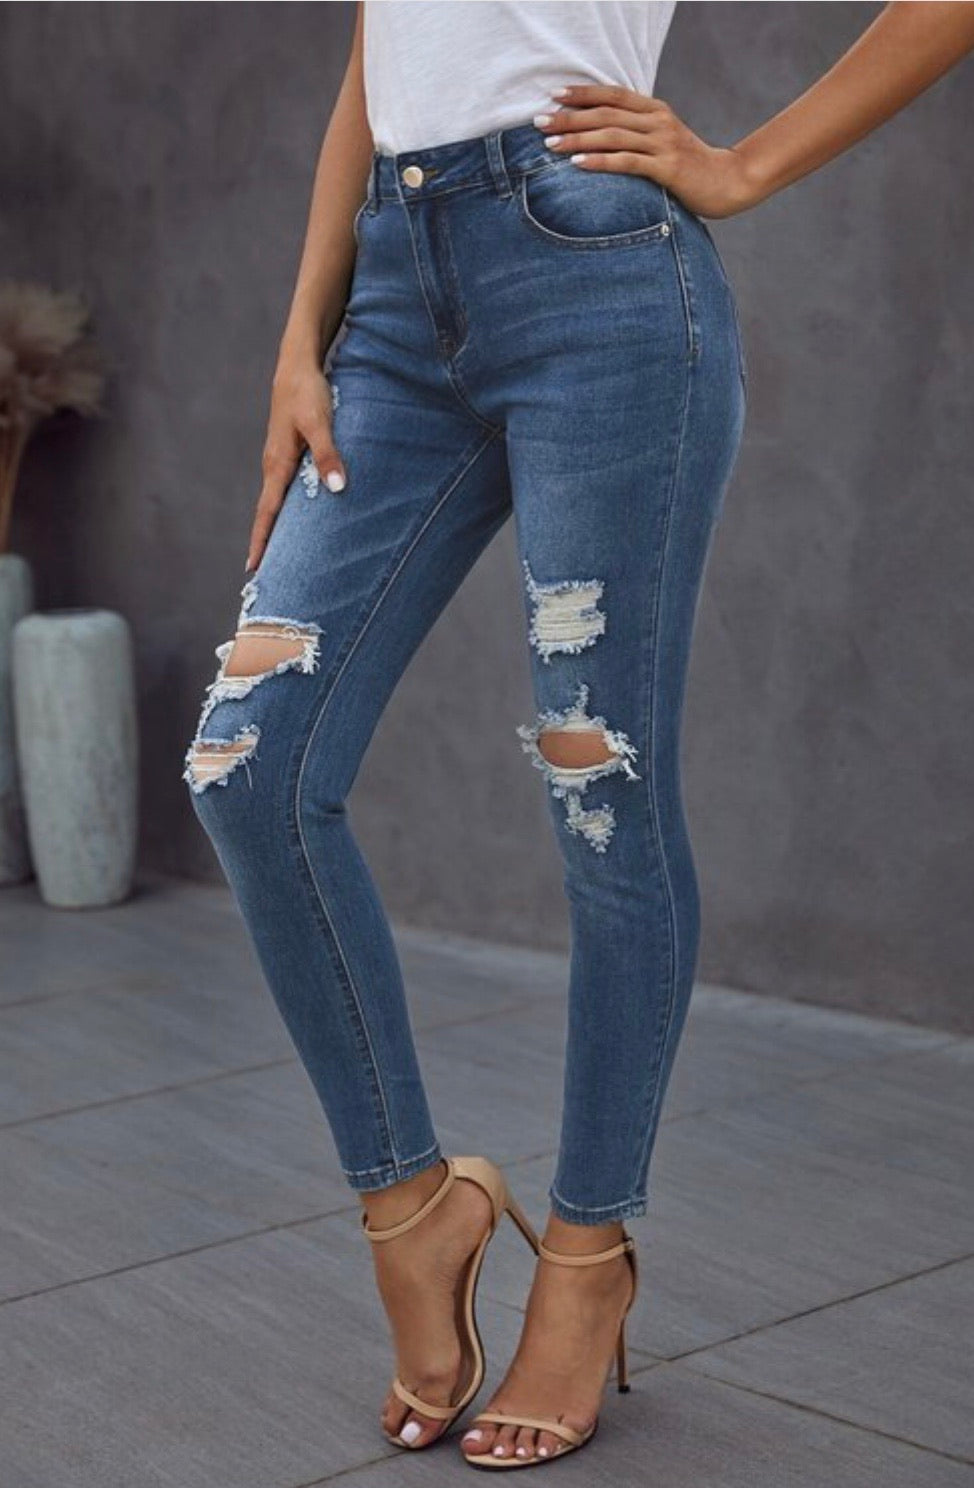 Viv Vintage Ripped Skinny Jeans - Corinne Boutique Family Owned and Operated USA